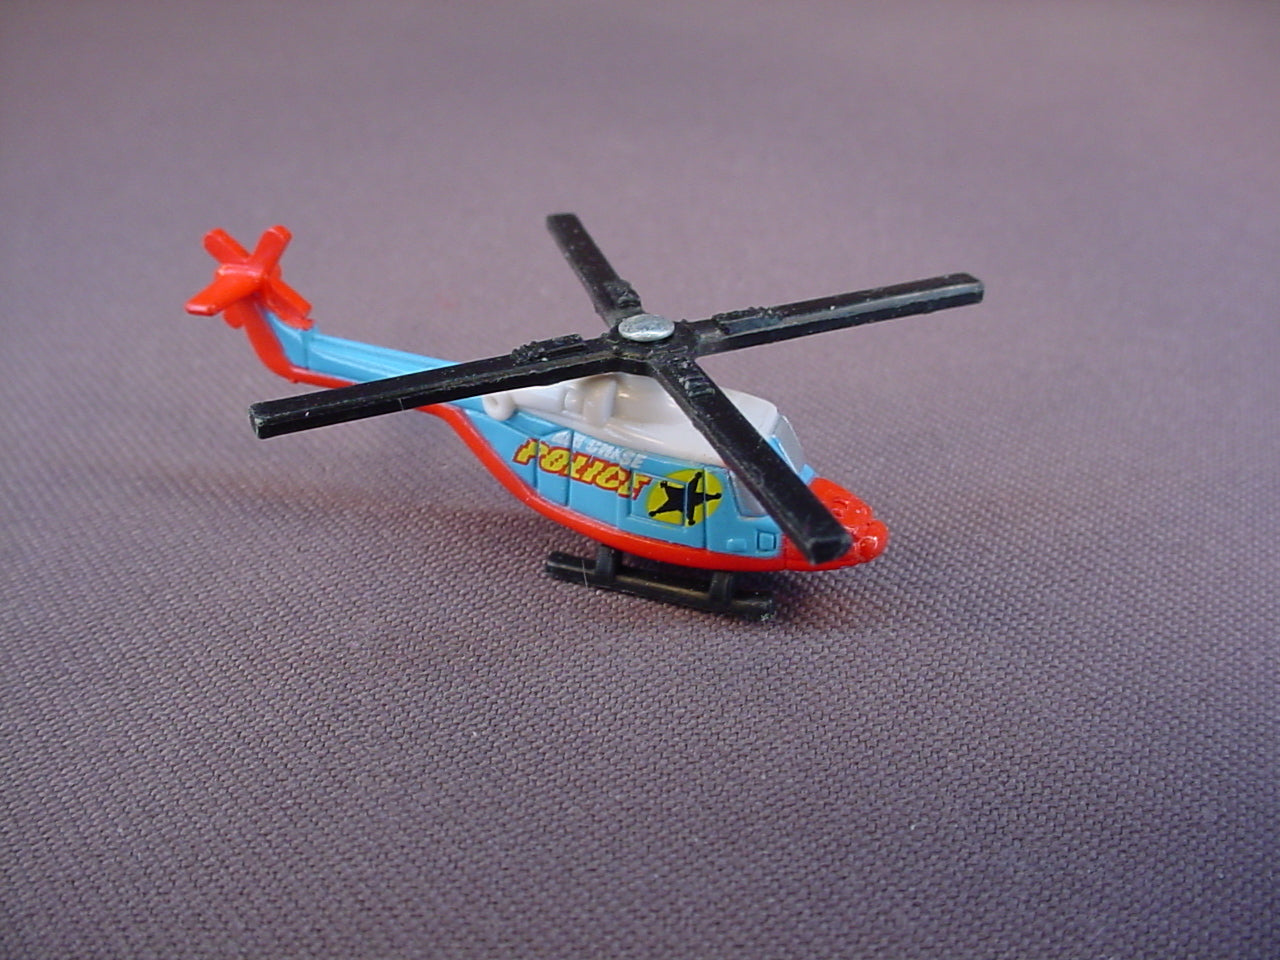 Micro Machines Hot Wheels Westland Lynx Police Helicopter, Micro Atomix Rescue, Plastic, 1:87 Scale, C6456, 2004 Mattel